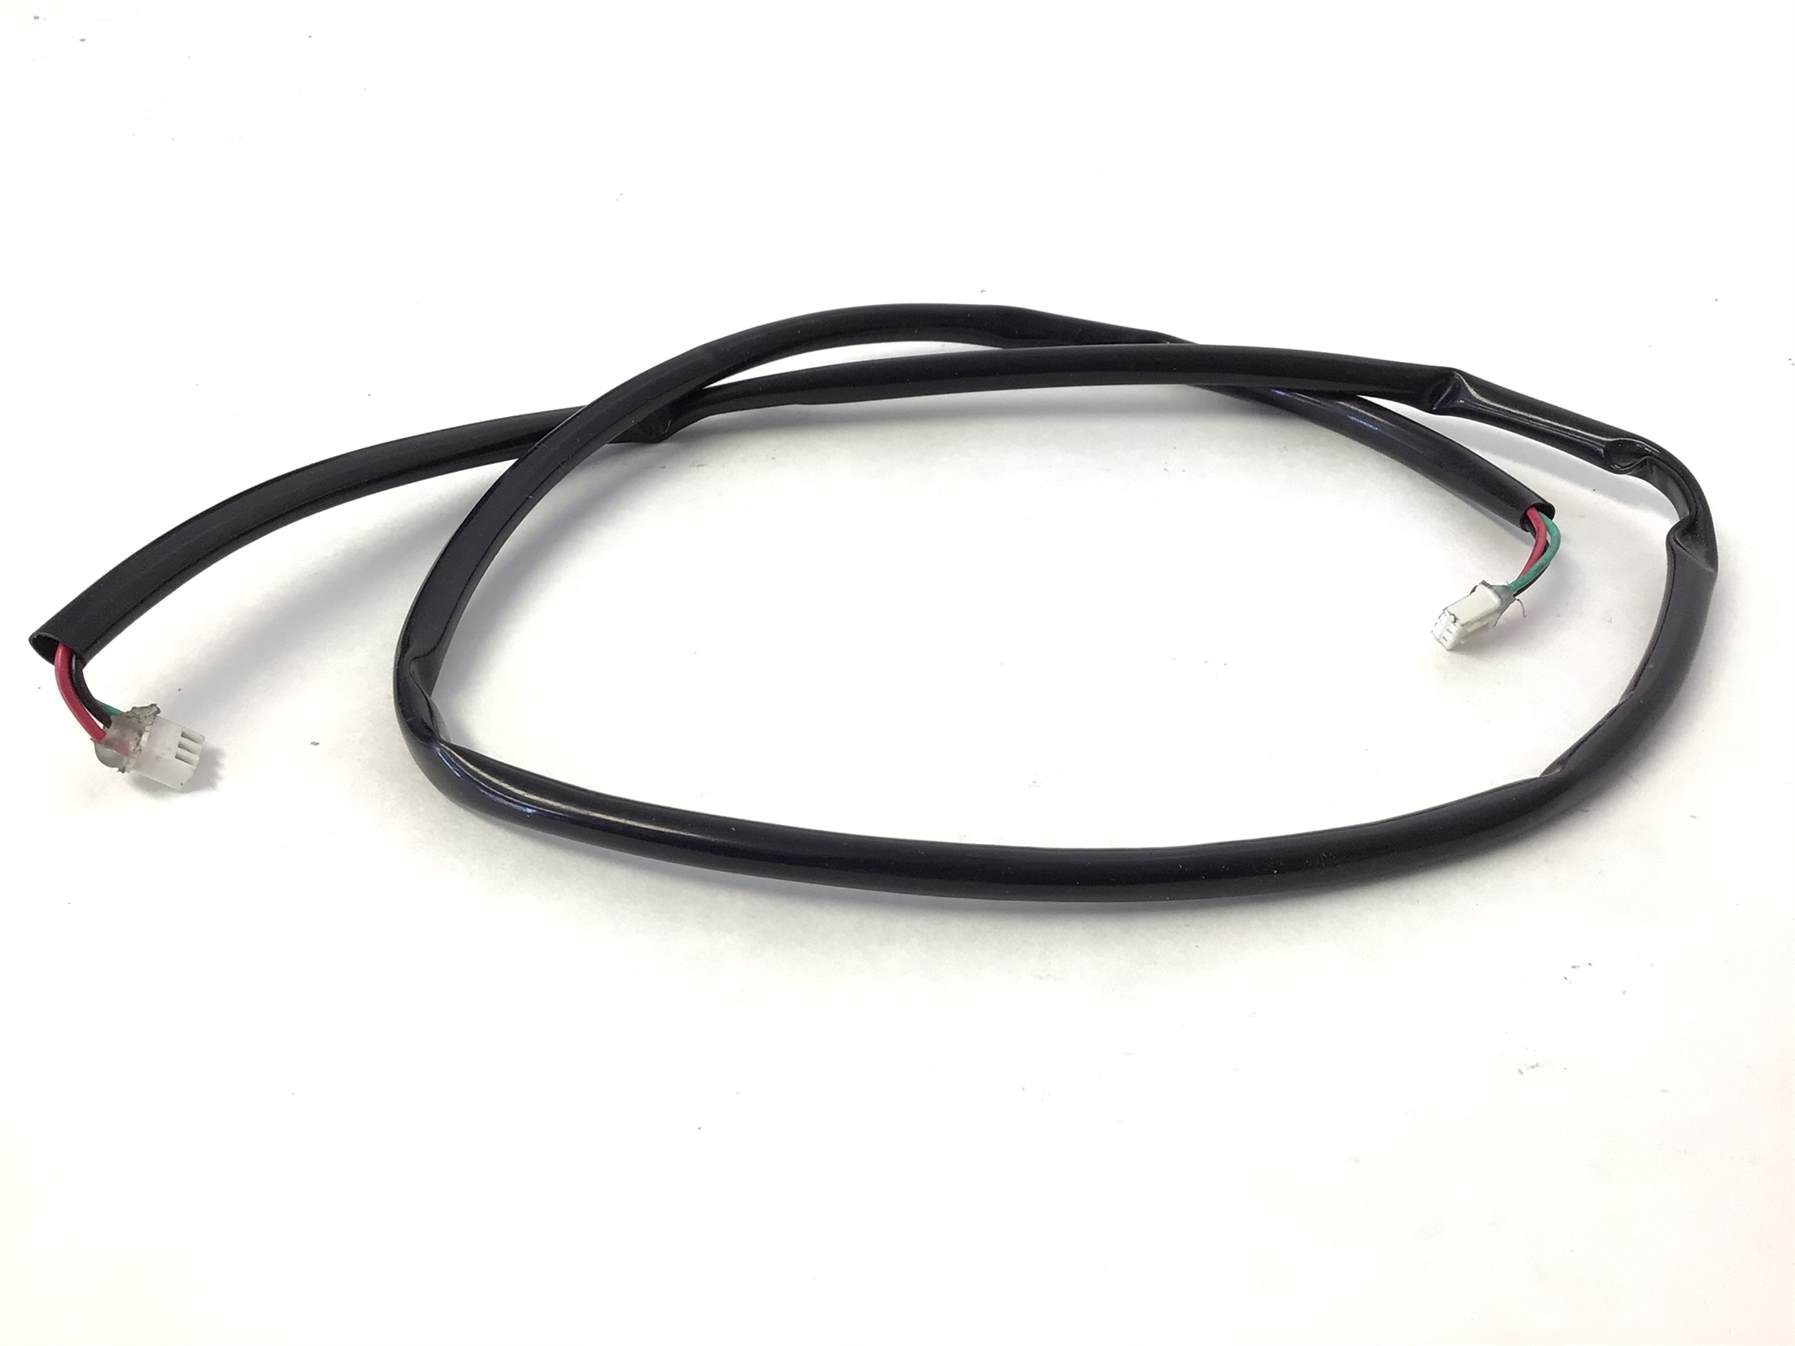 Used Sports Art 3 Pin Wire Harness Interconnect 1190 Treadmill